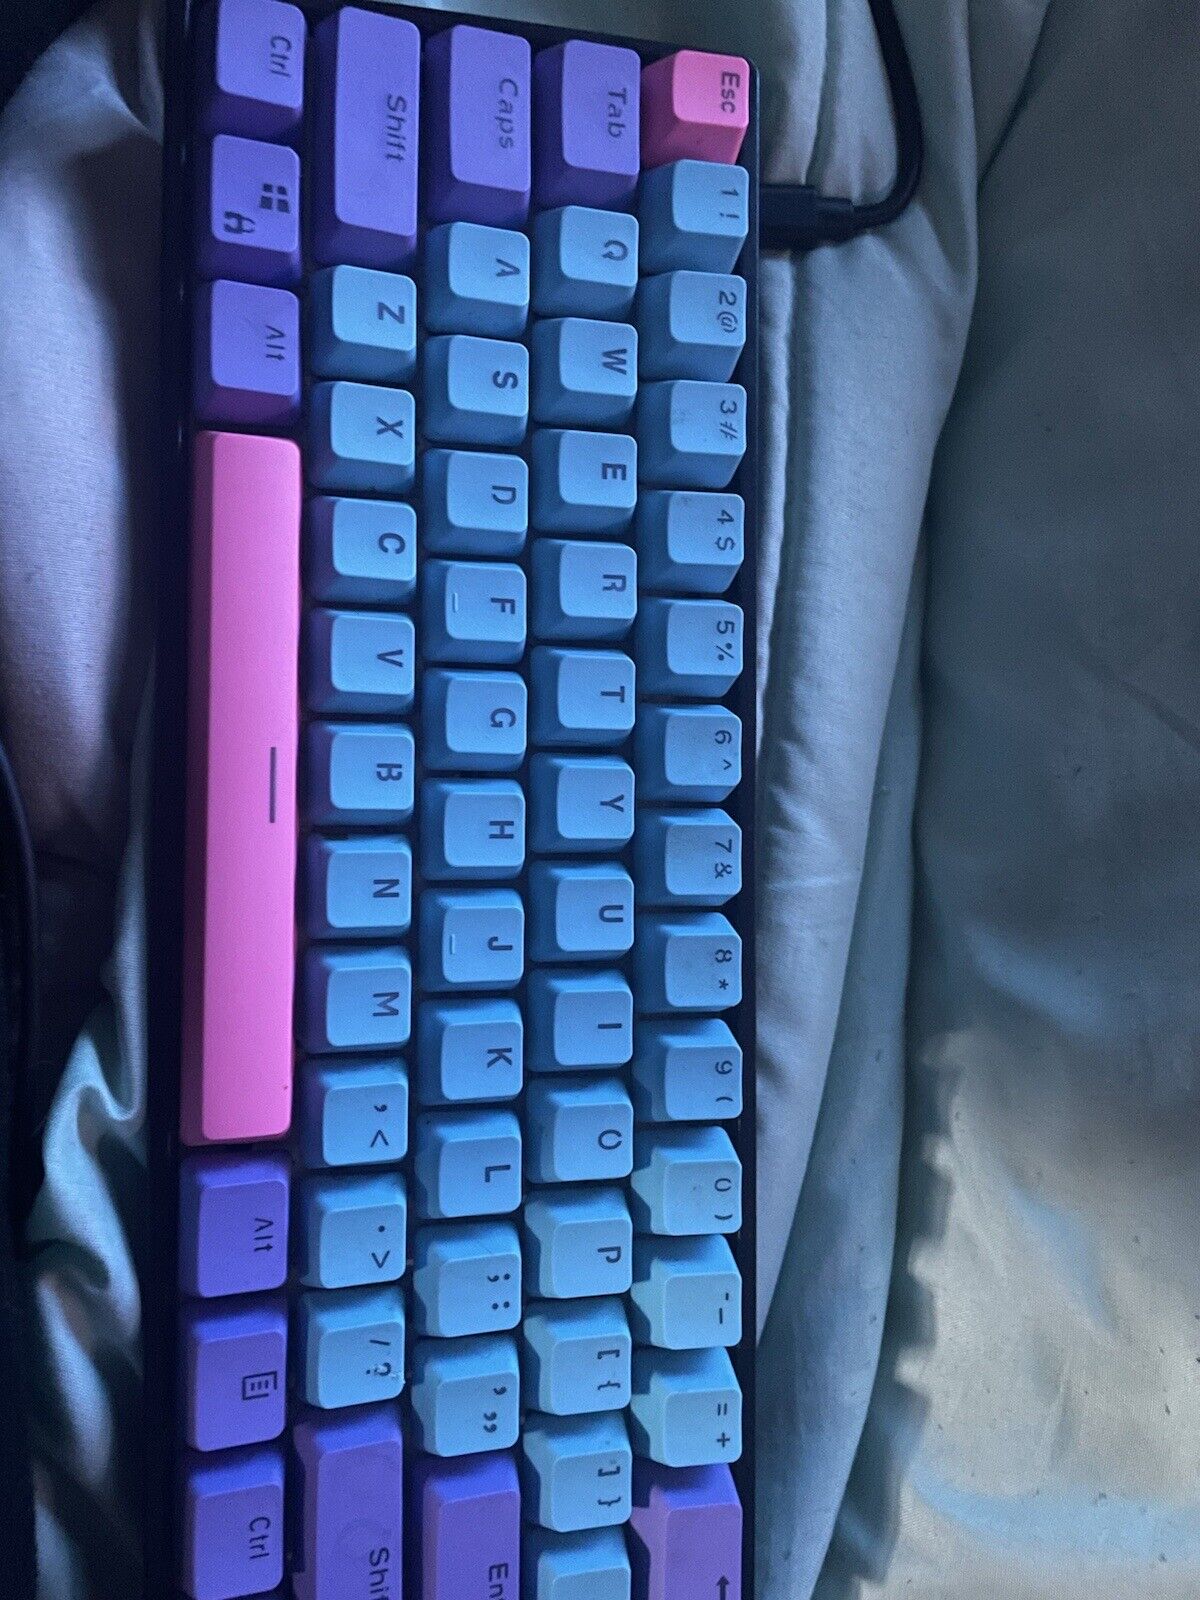 Asceny One - 60% Mechanical Keyboard, True RGB Lights, Spill Proof,Wired Budget